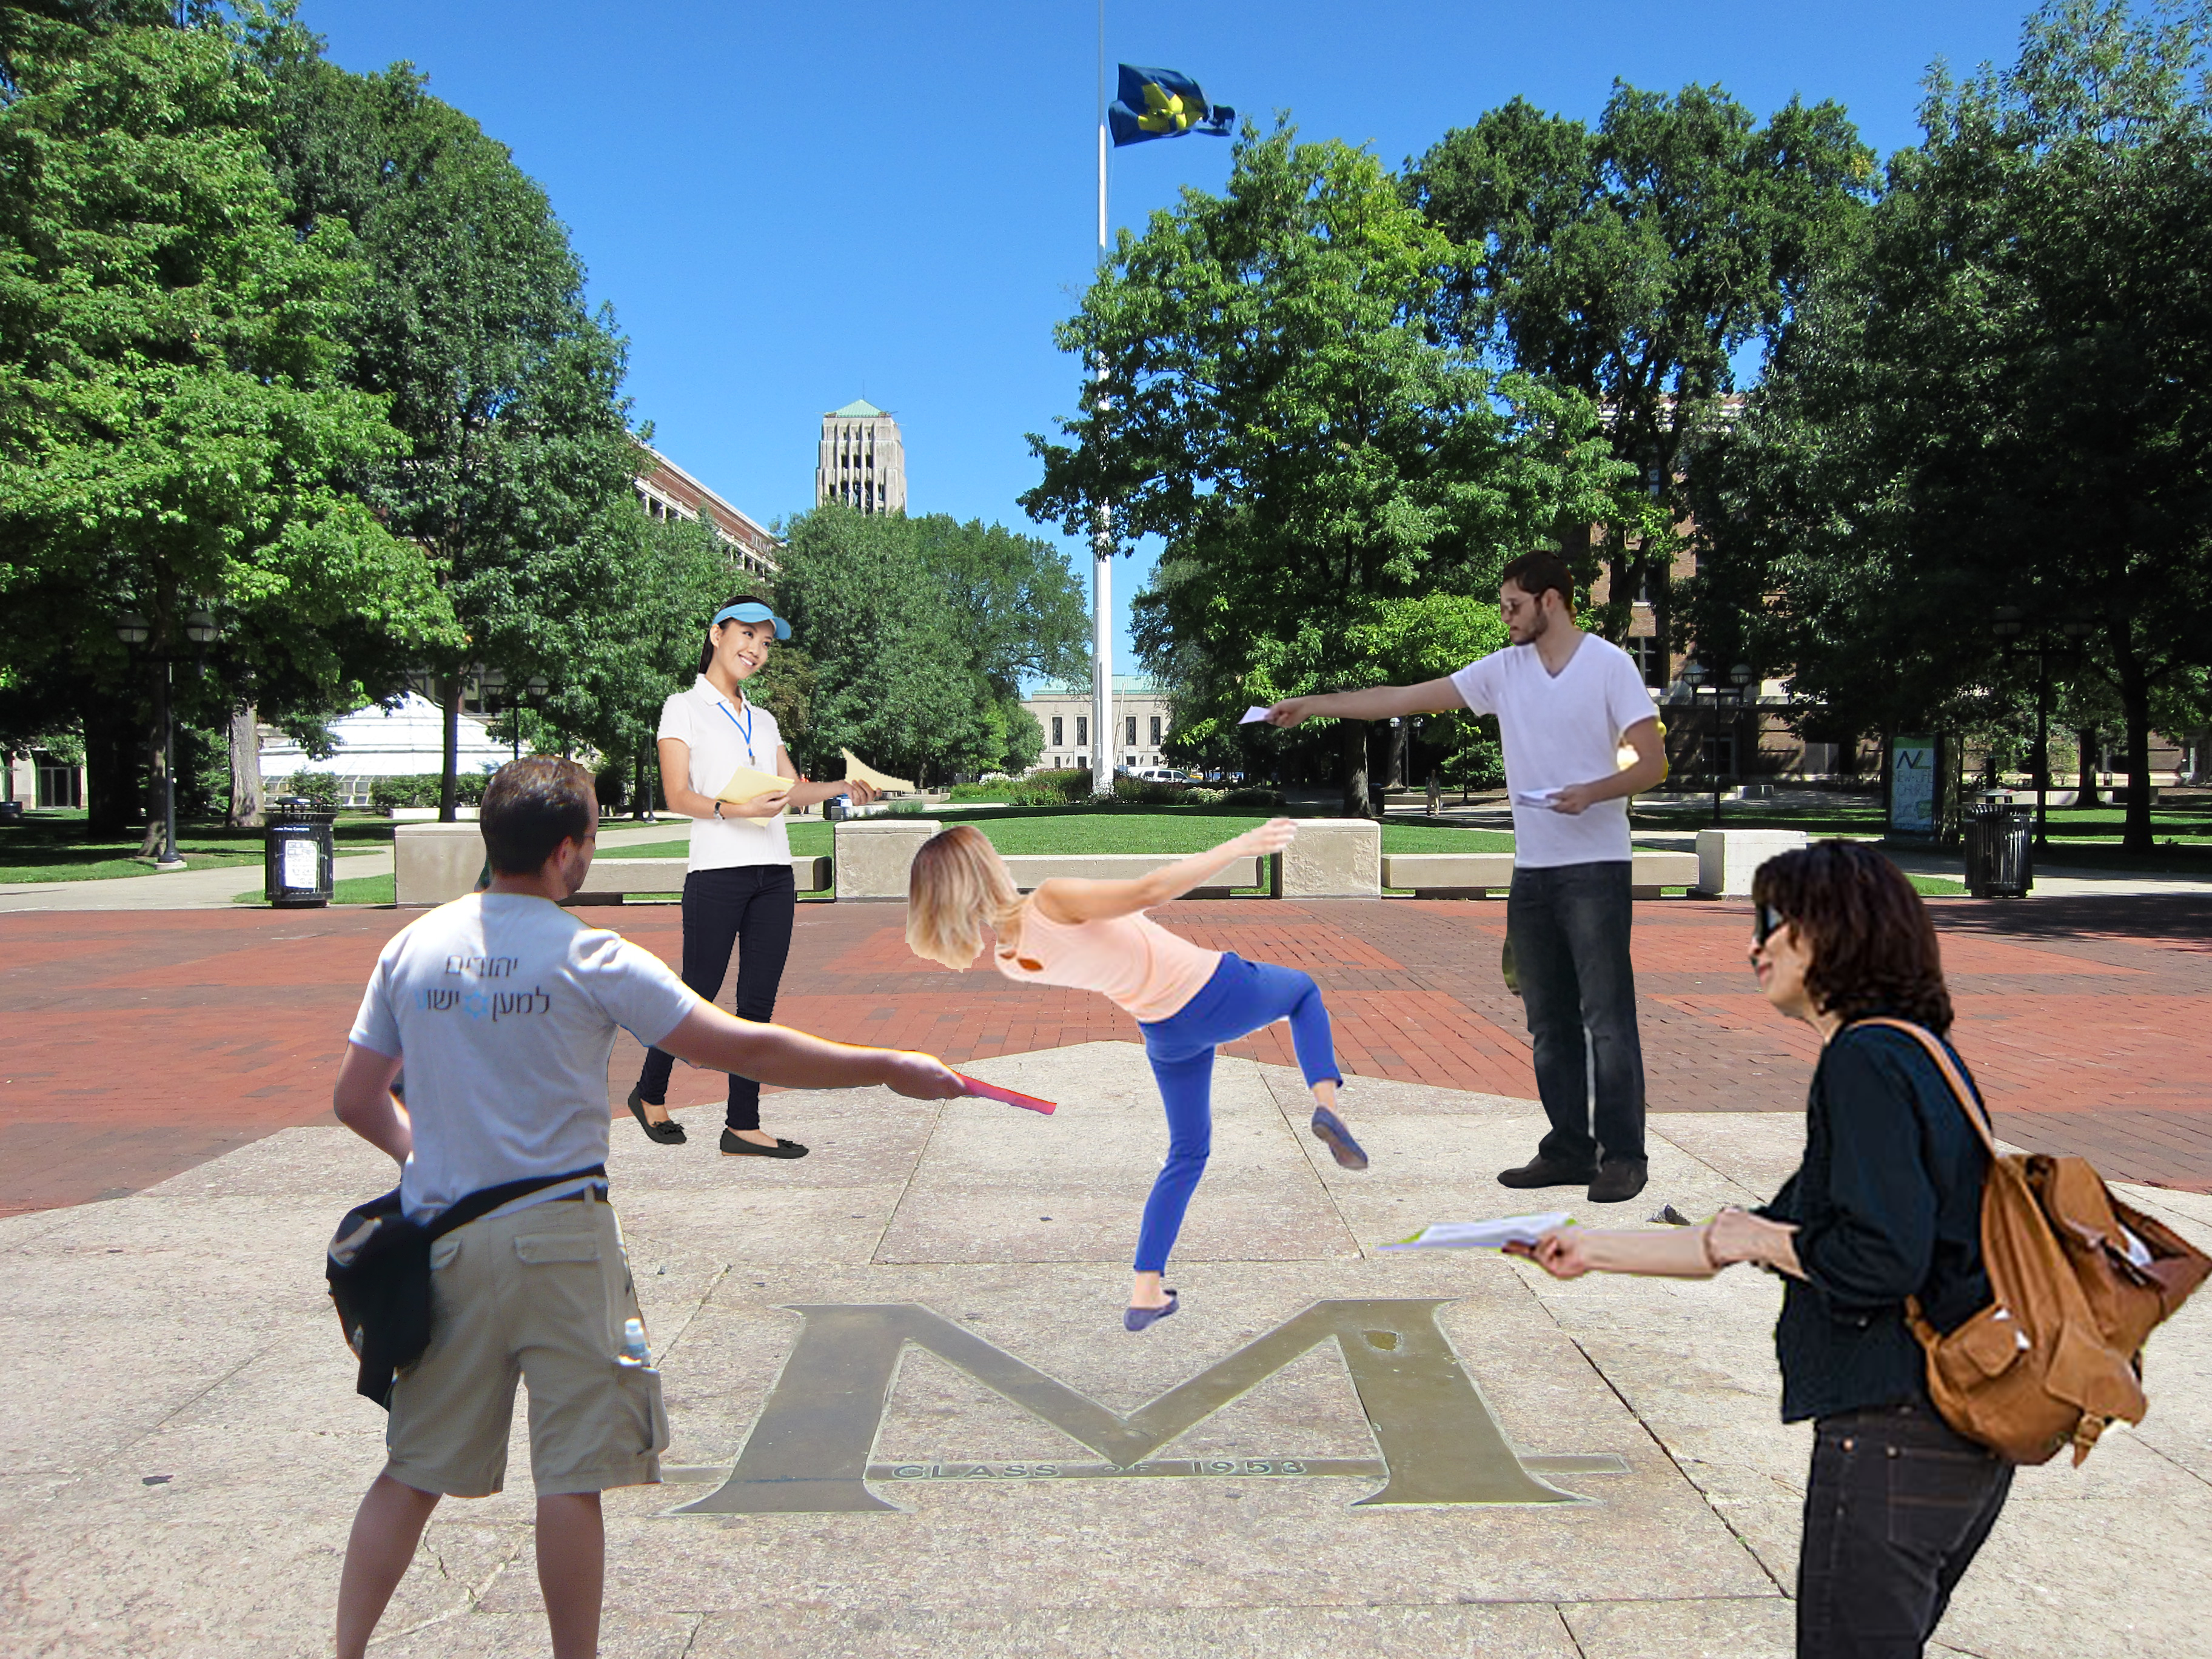 Photoshopped woman doing backflip on college campus surrounded by solicitors